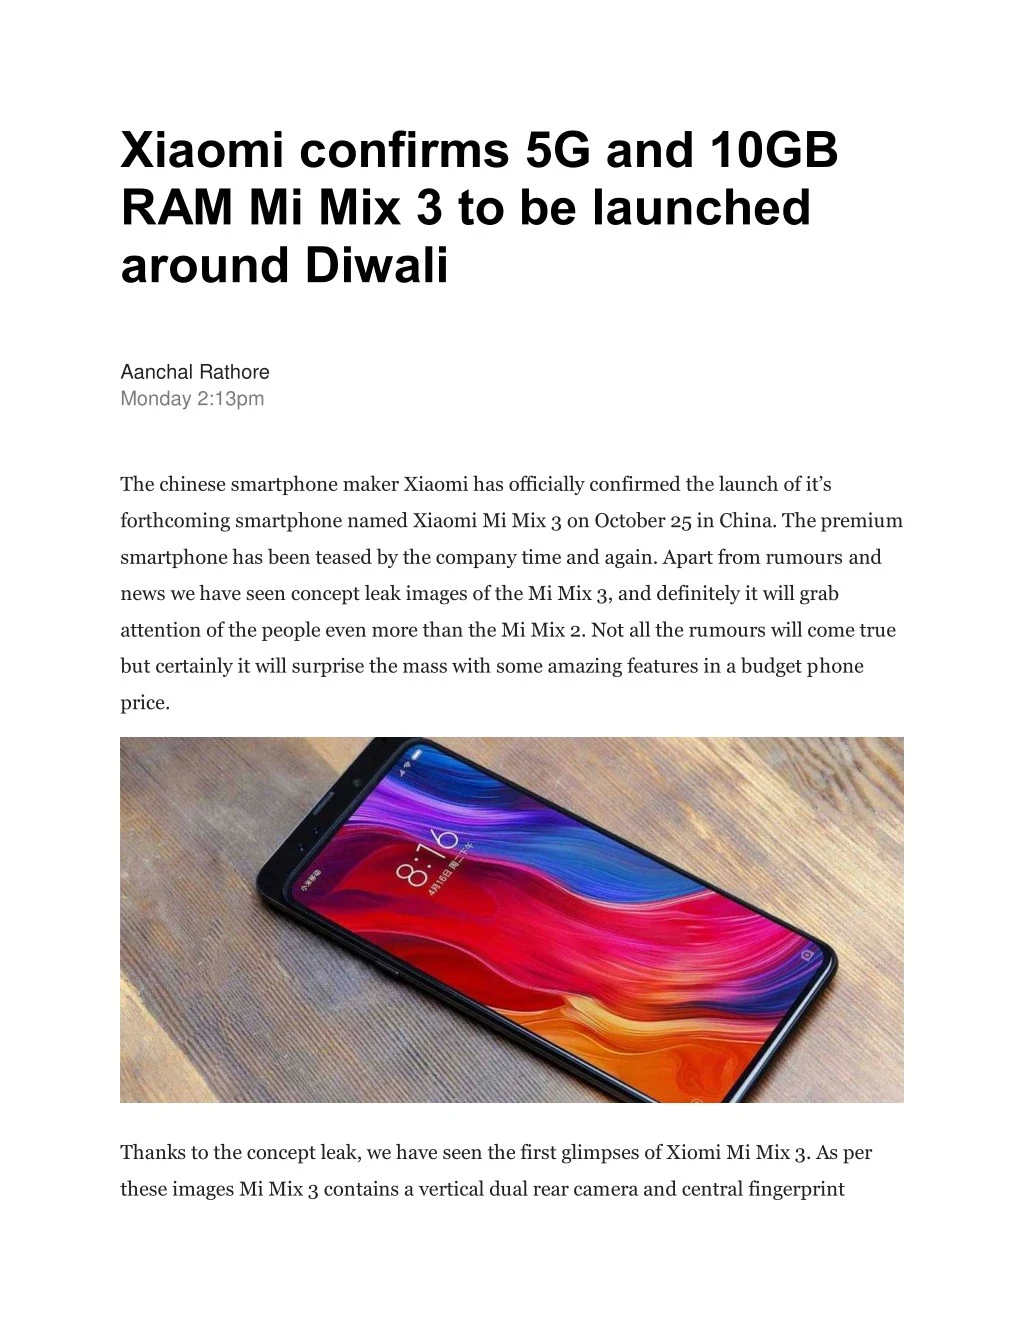 xiaomi confirms 5g and 10gb